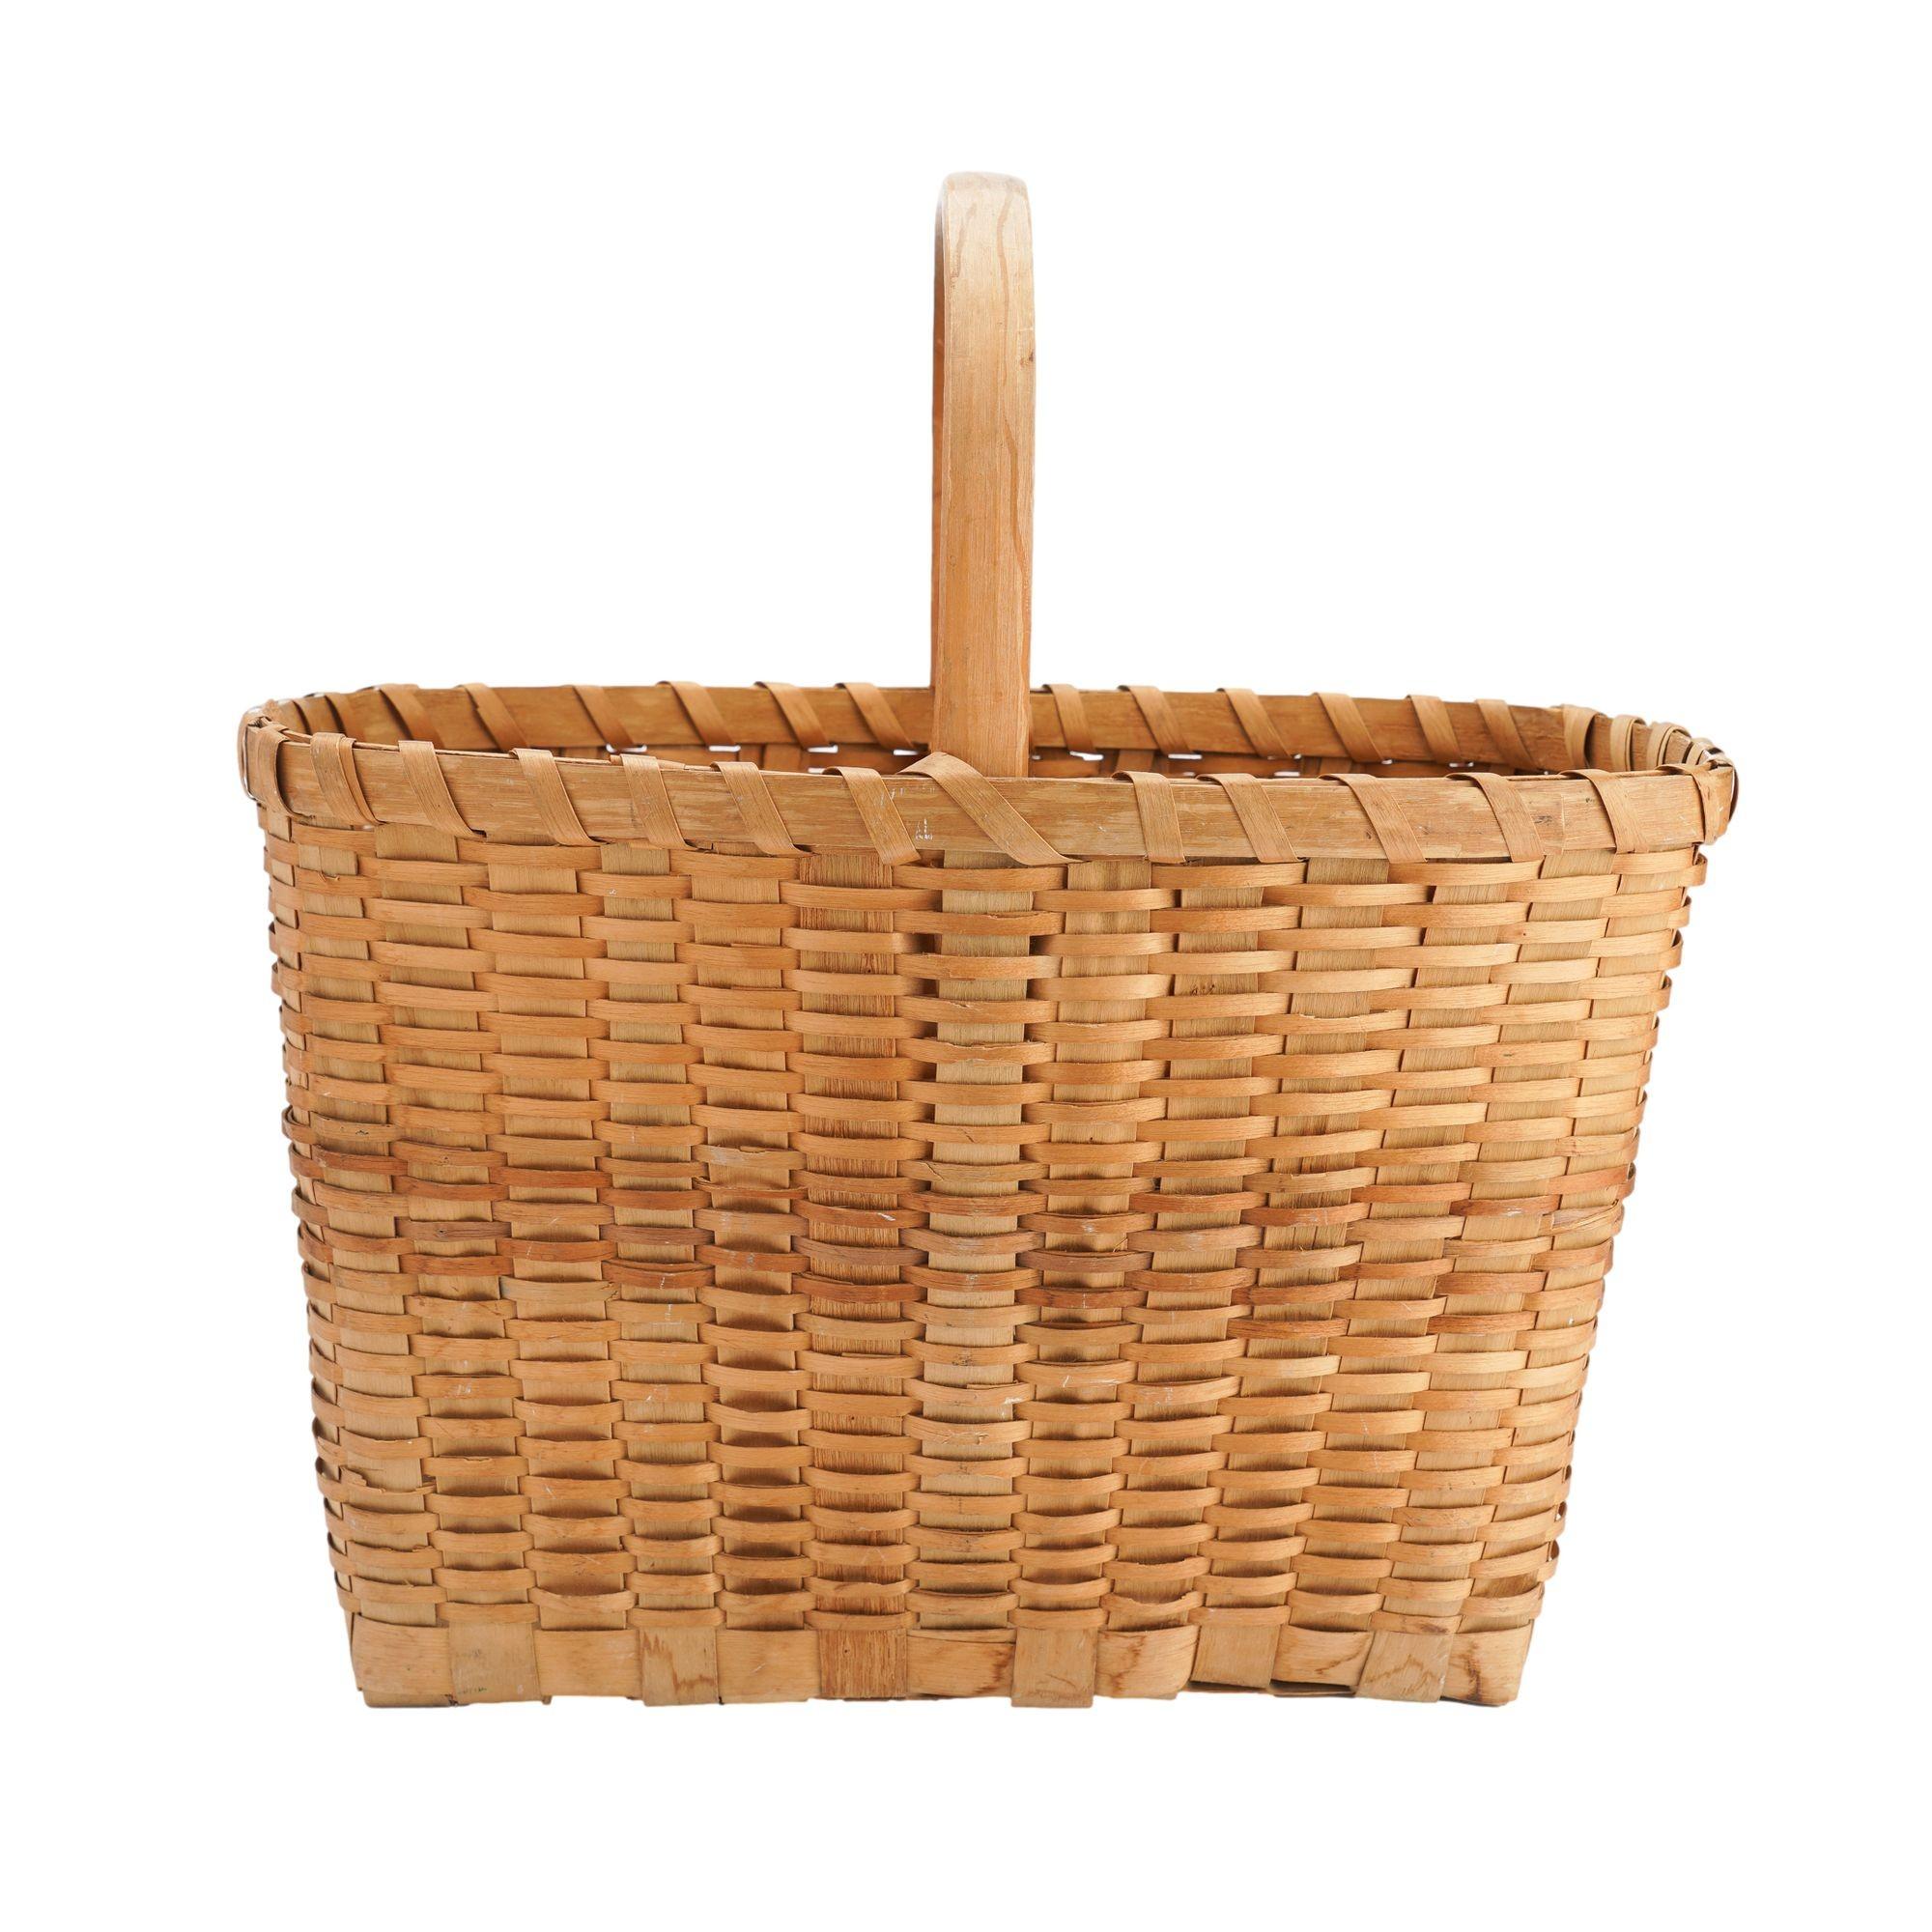 Native American Winnebago/Ho-chunk hand carved & woven ash splint basket with loop handle. The rim of the basket is captured by two carved and bent ash splines with 1/4